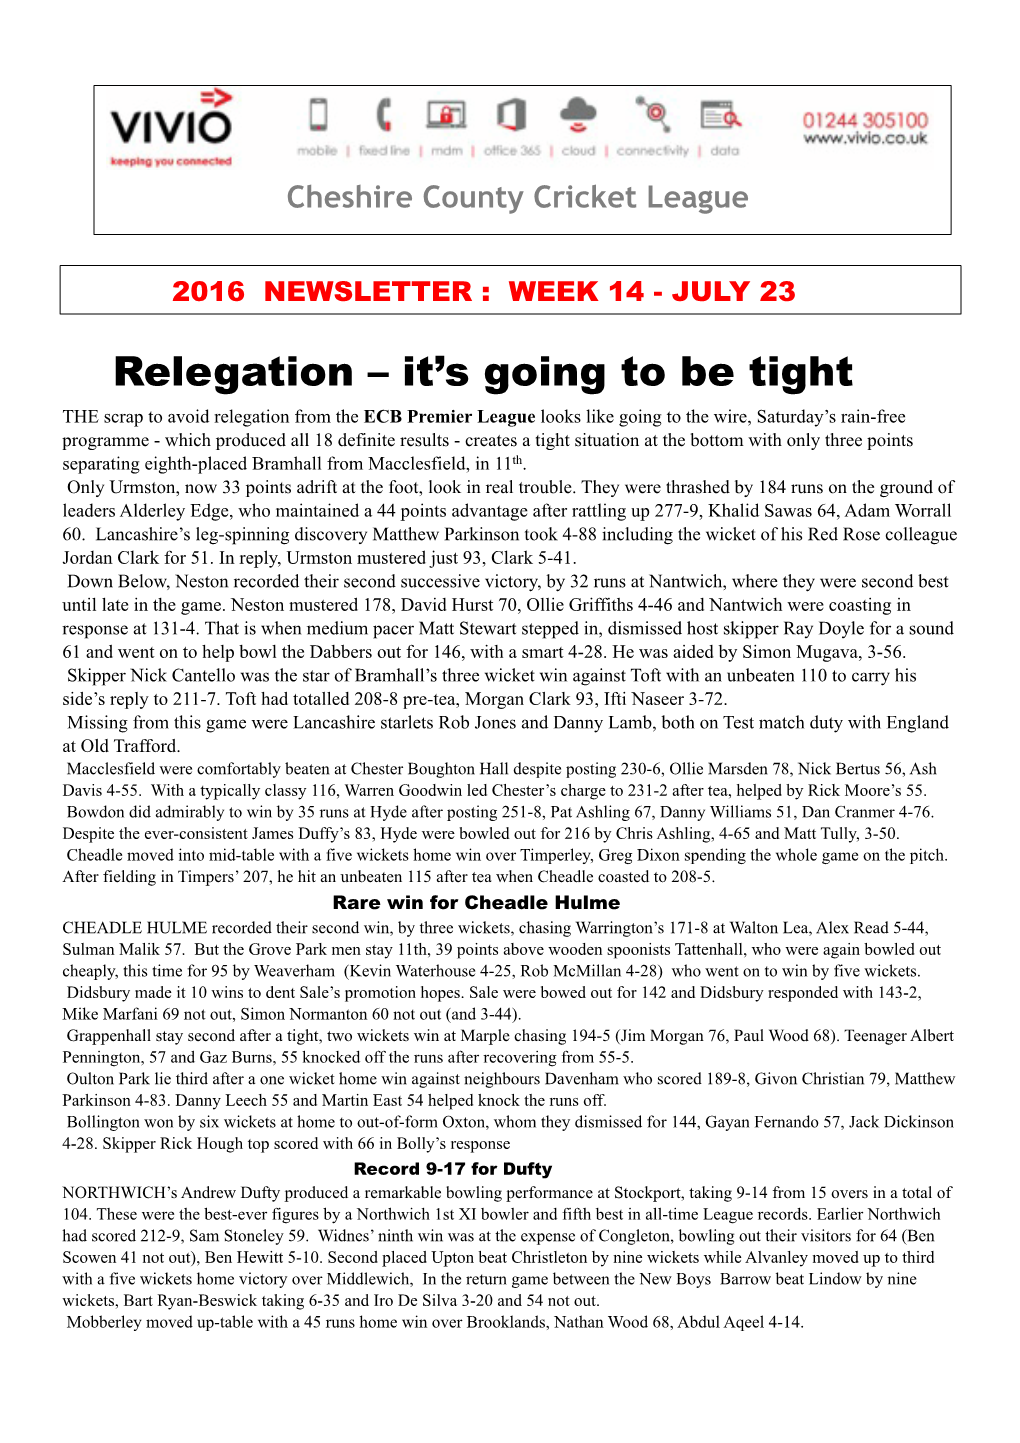 Relegation – It's Going to Be Tight